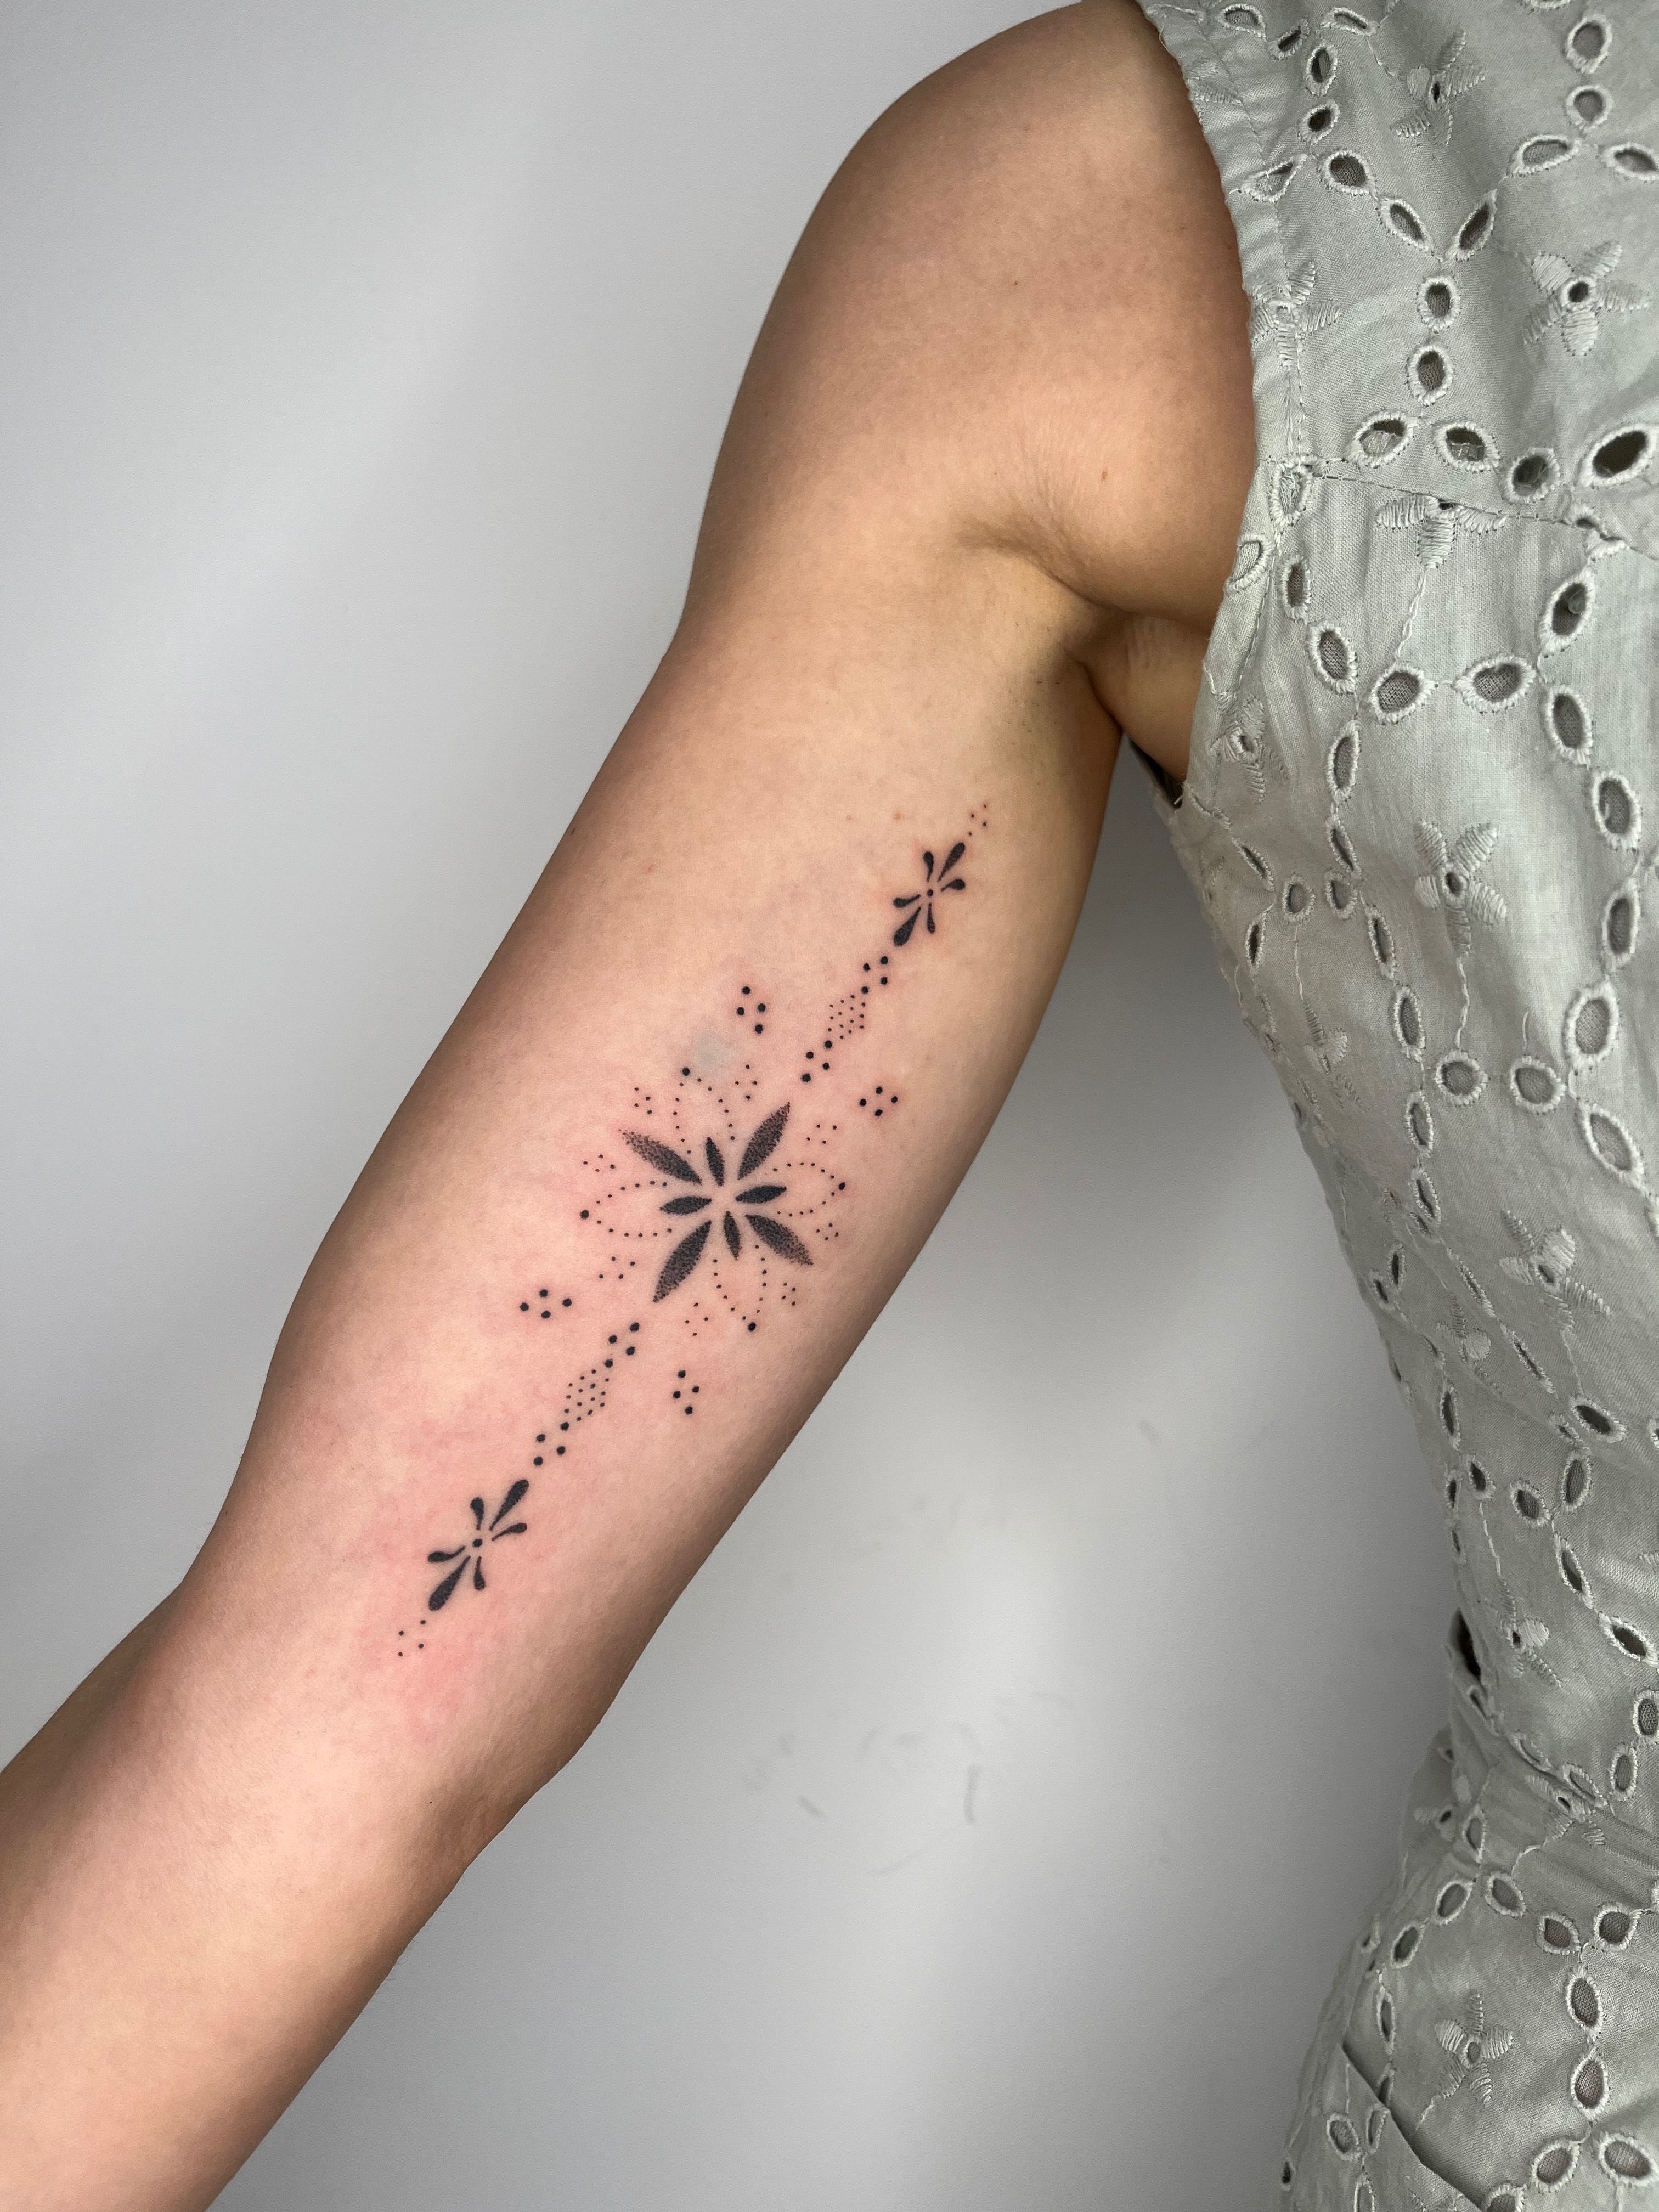 The Tattoo Artist's Guide to Tattoo Symbols and What They Mean - Florida  Tattoo Academy